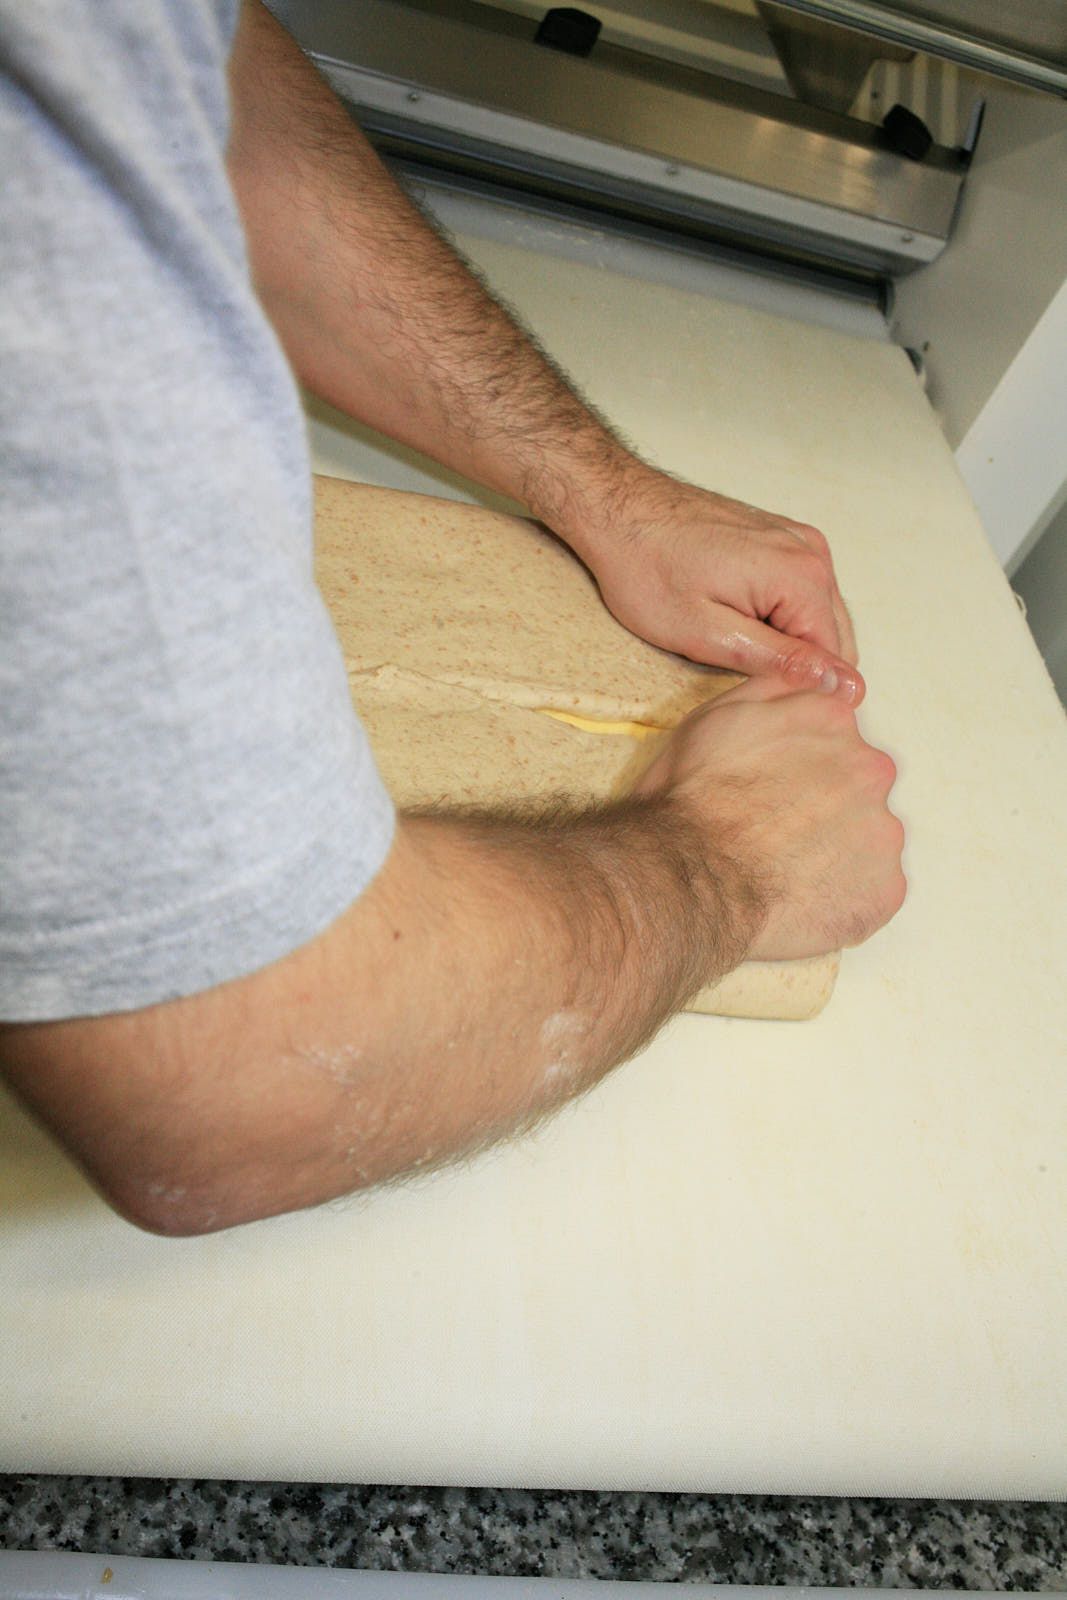 A baker folds dough over a block of butter, preparing it for lamination